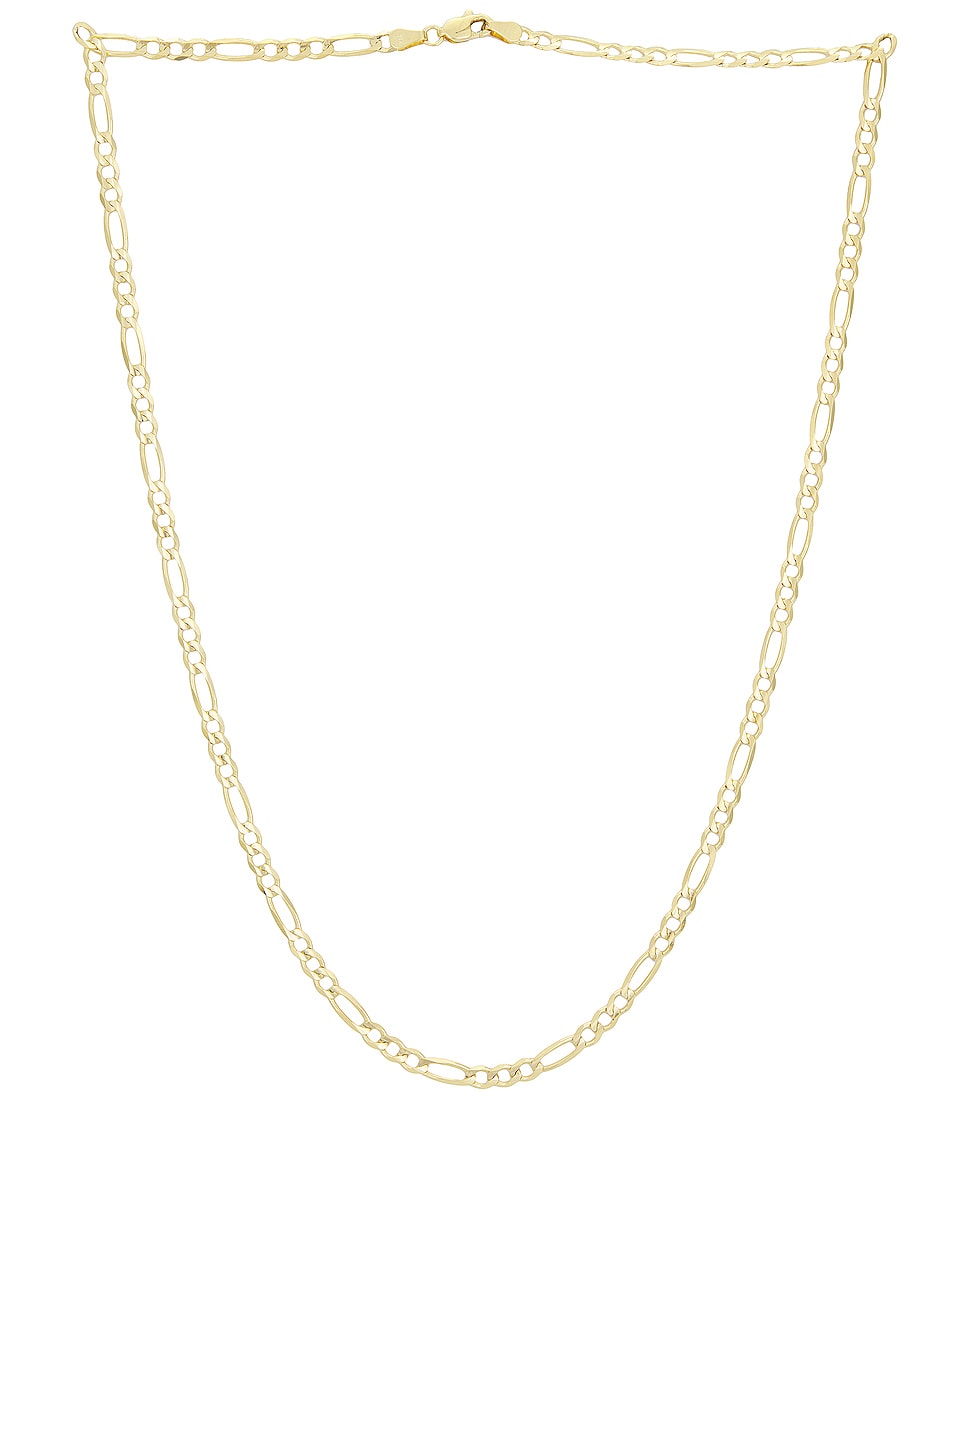 Image 1 of Greg Yuna 3.8mm Figaro Chain Necklace in Gold